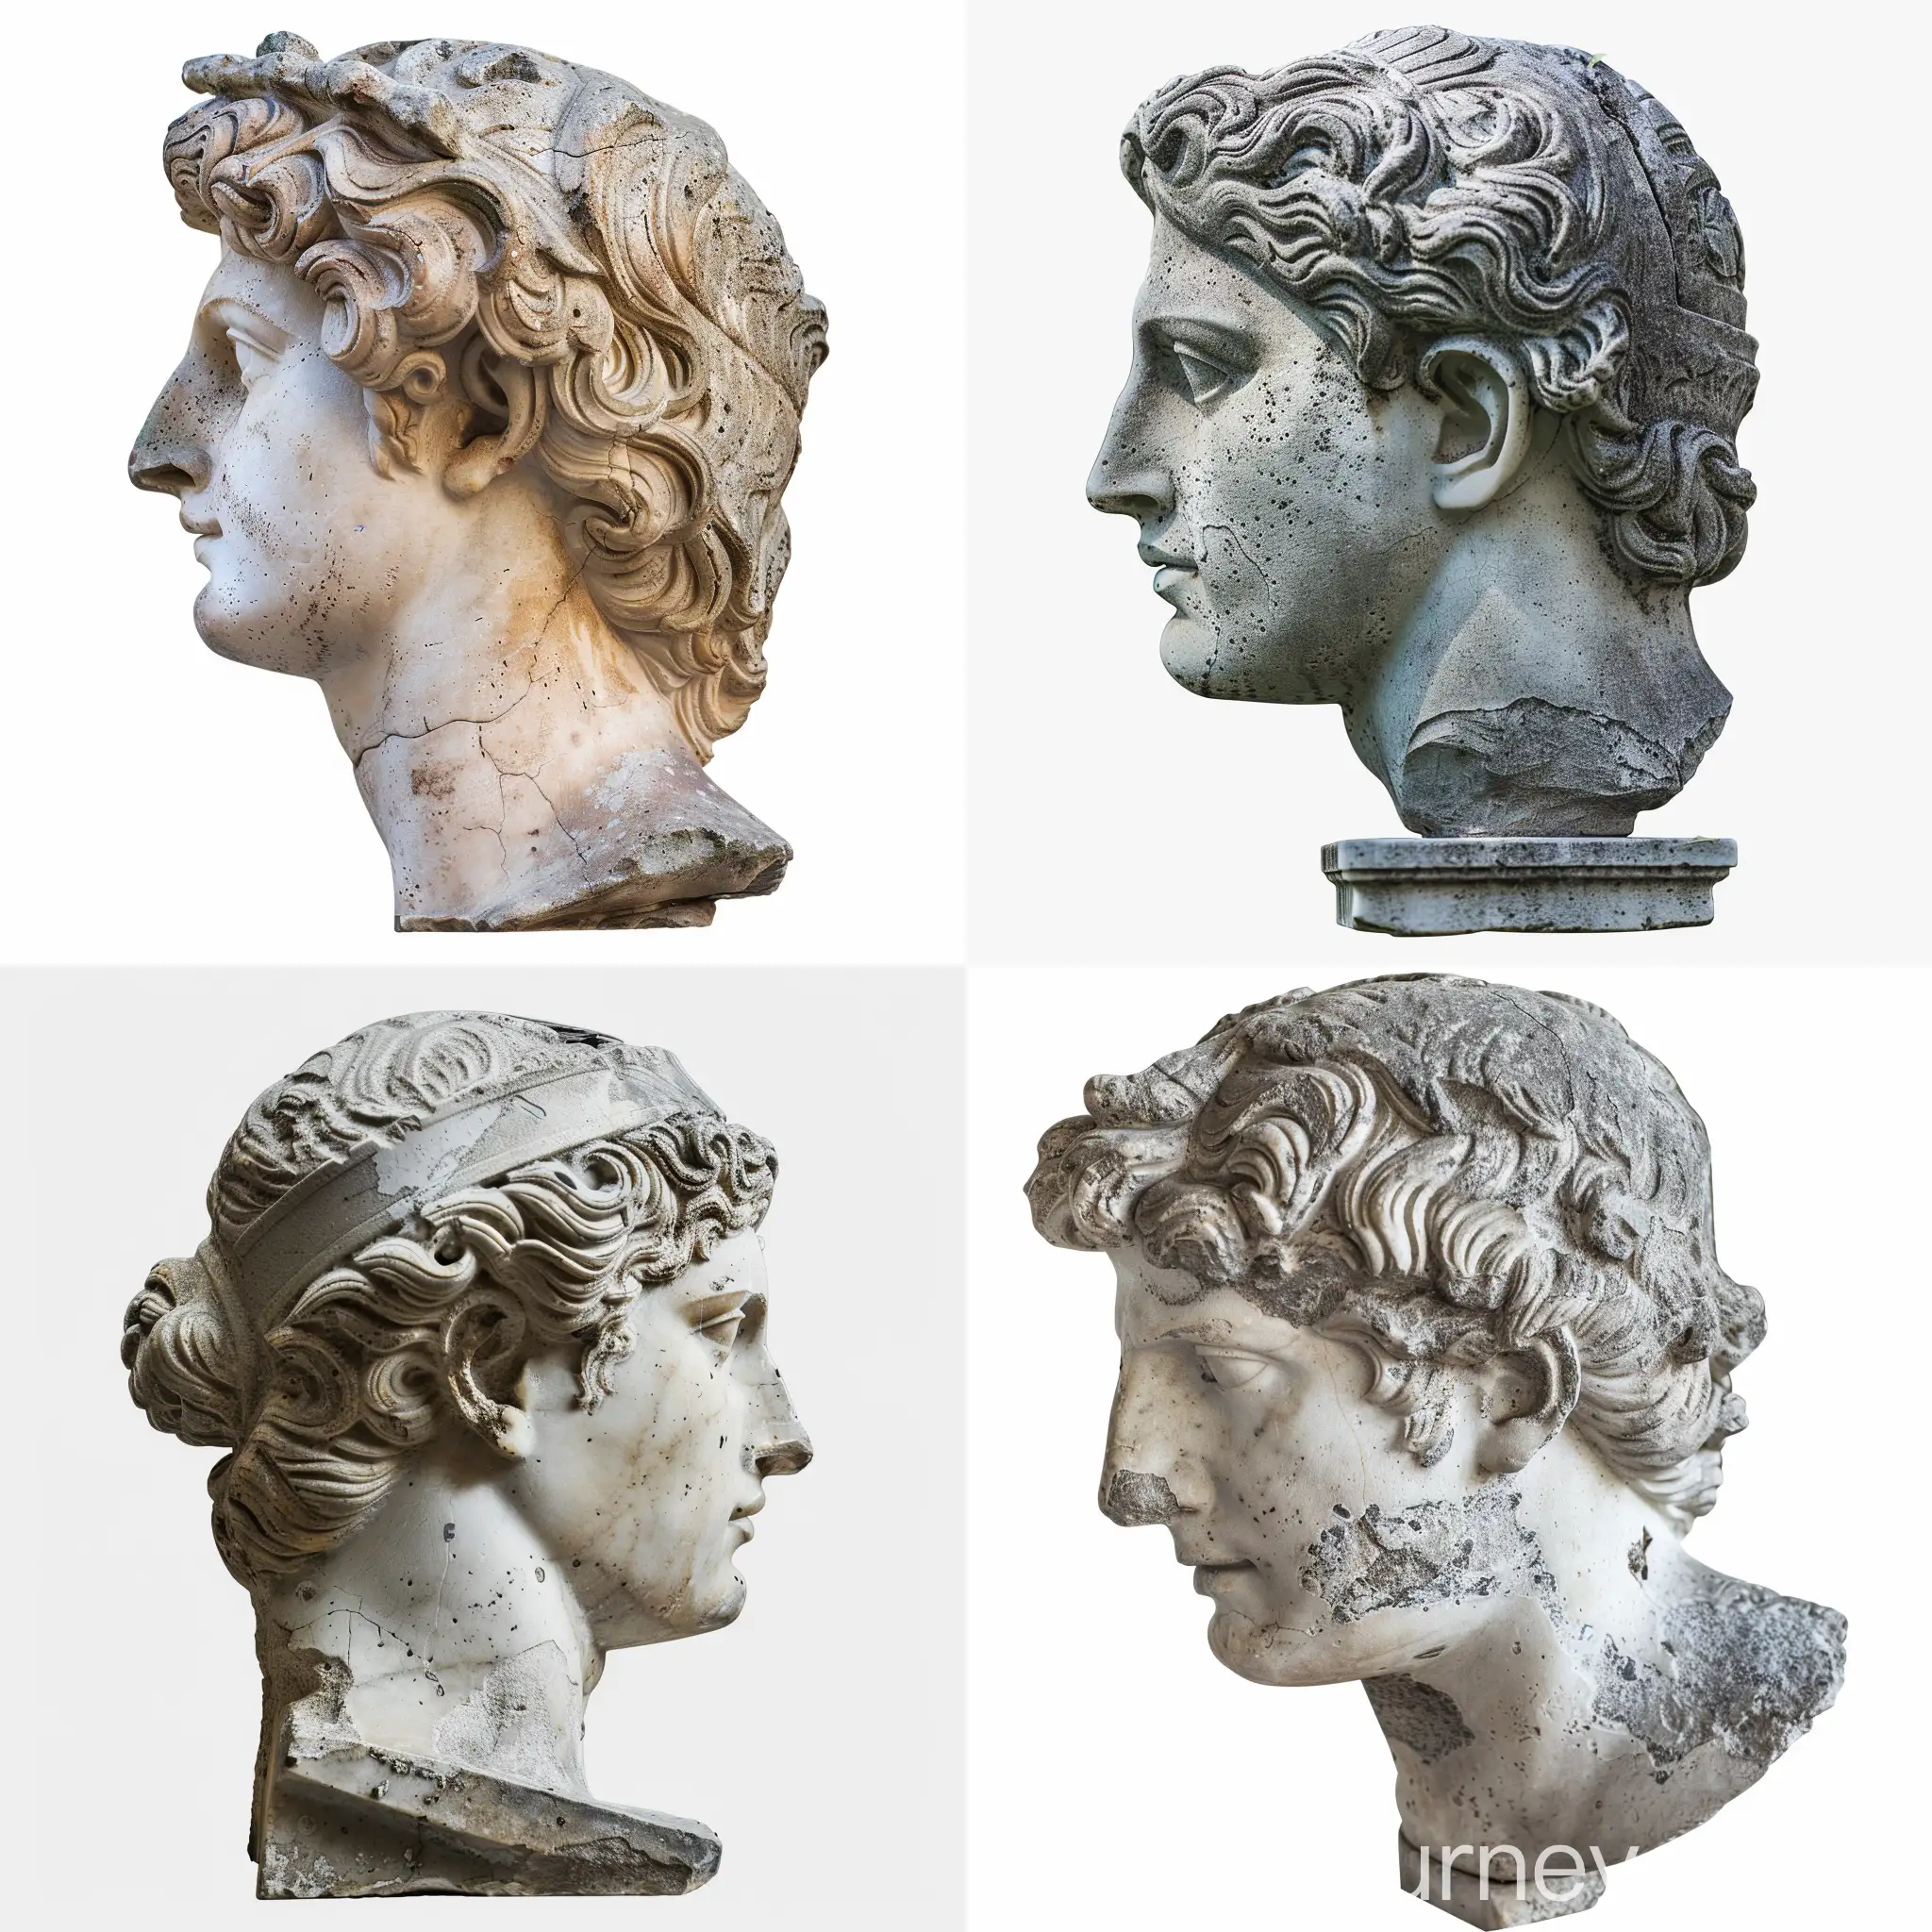 Sculpted-Head-Profile-Statue-in-Dramatic-Lighting